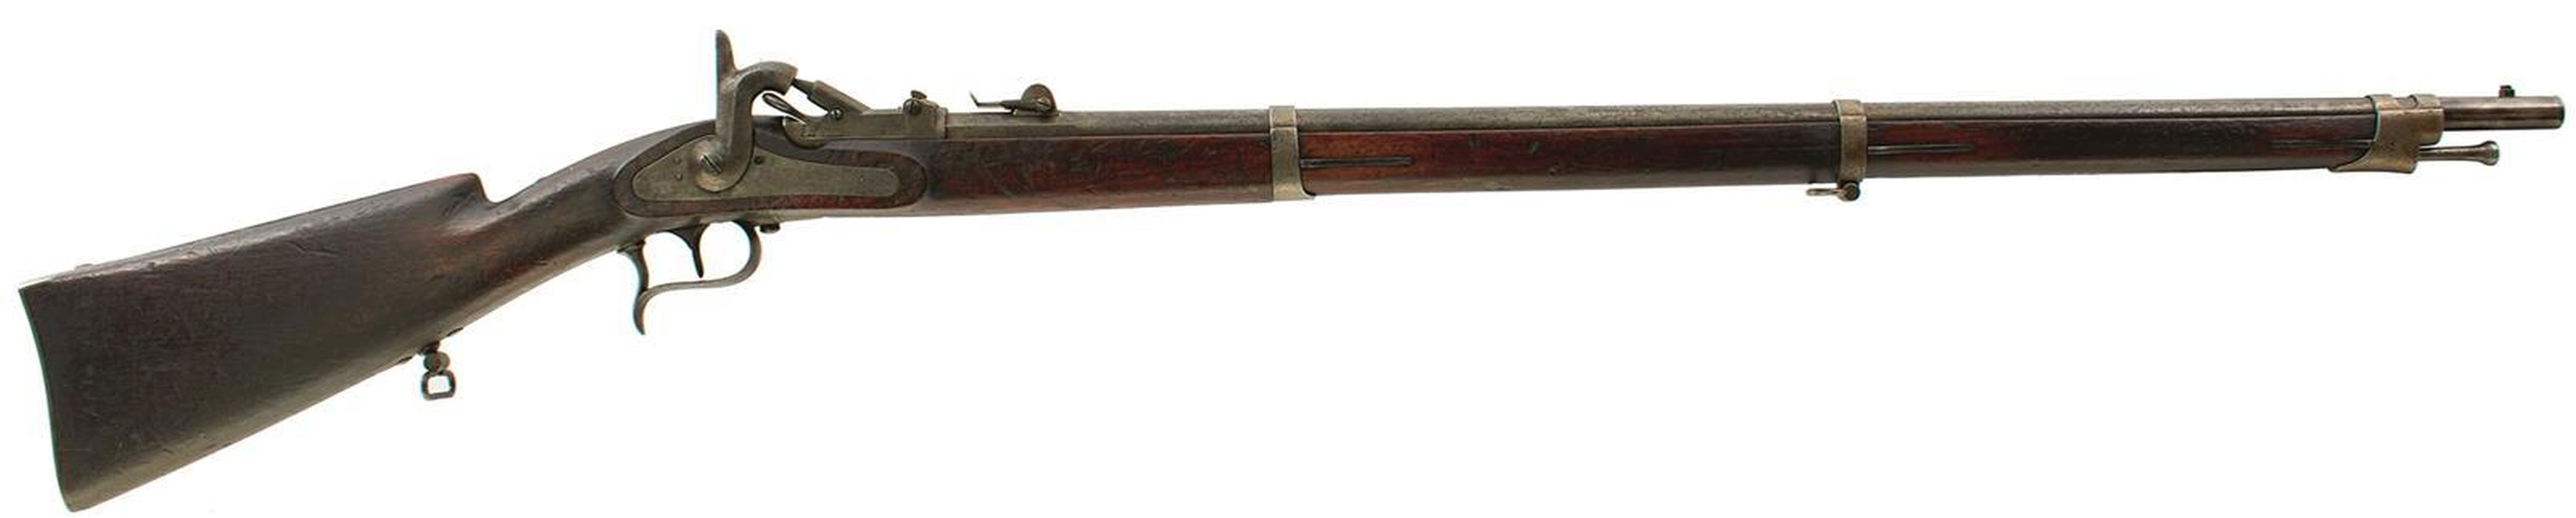 AN 18MM OBSOLETE CALIBRE SWISS MILBANK AMSLER SERVICE RIFLE, 33.5inch sighted barrel fitted with